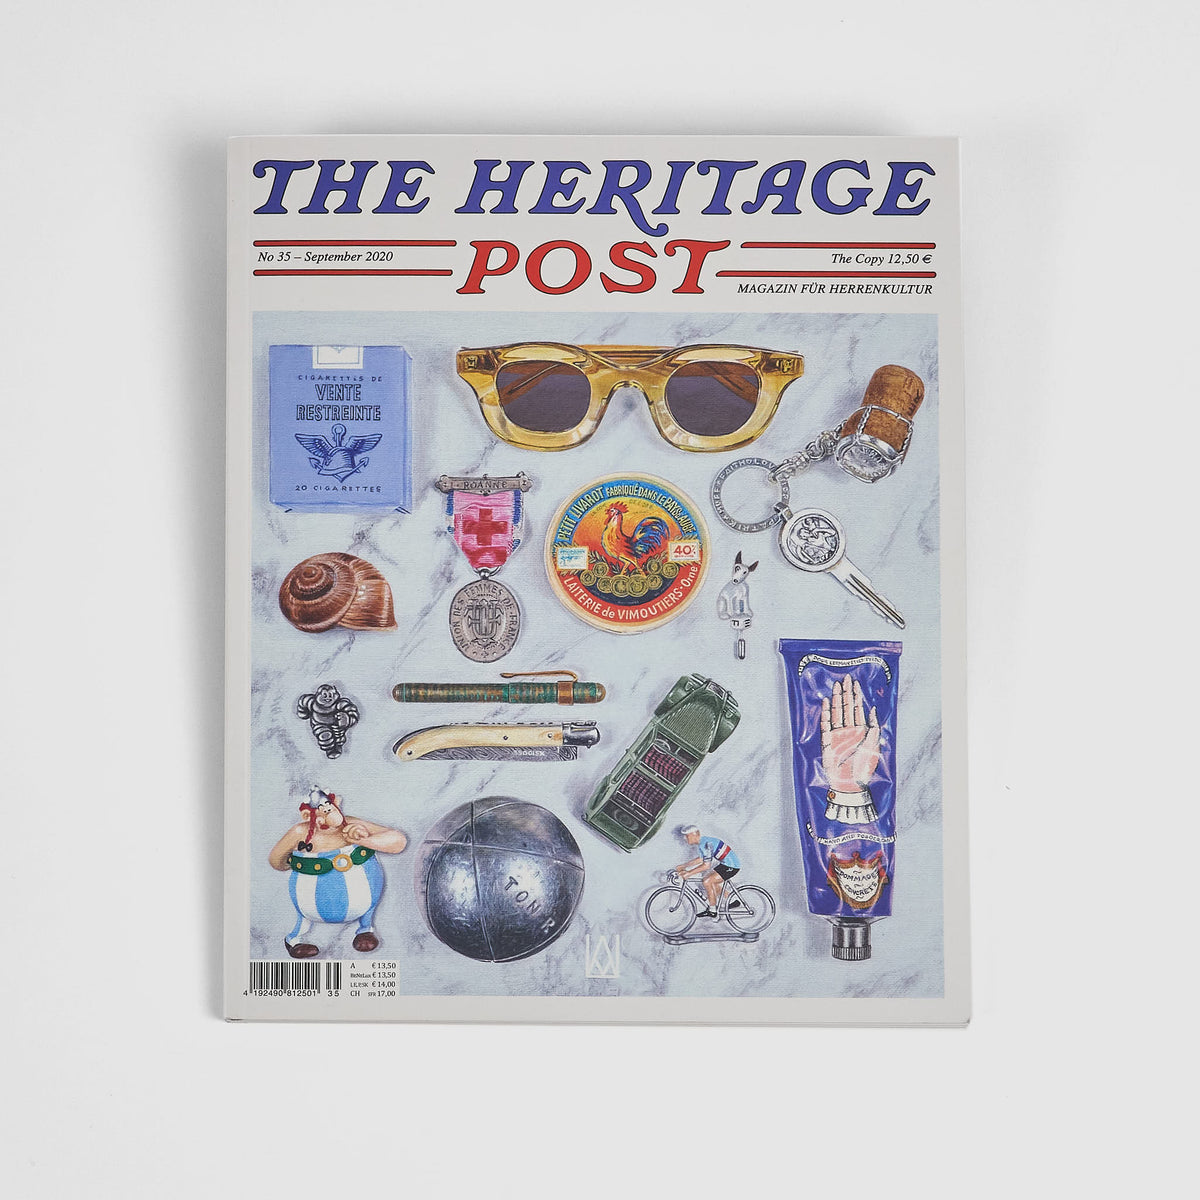 The Heritage Post No. 35